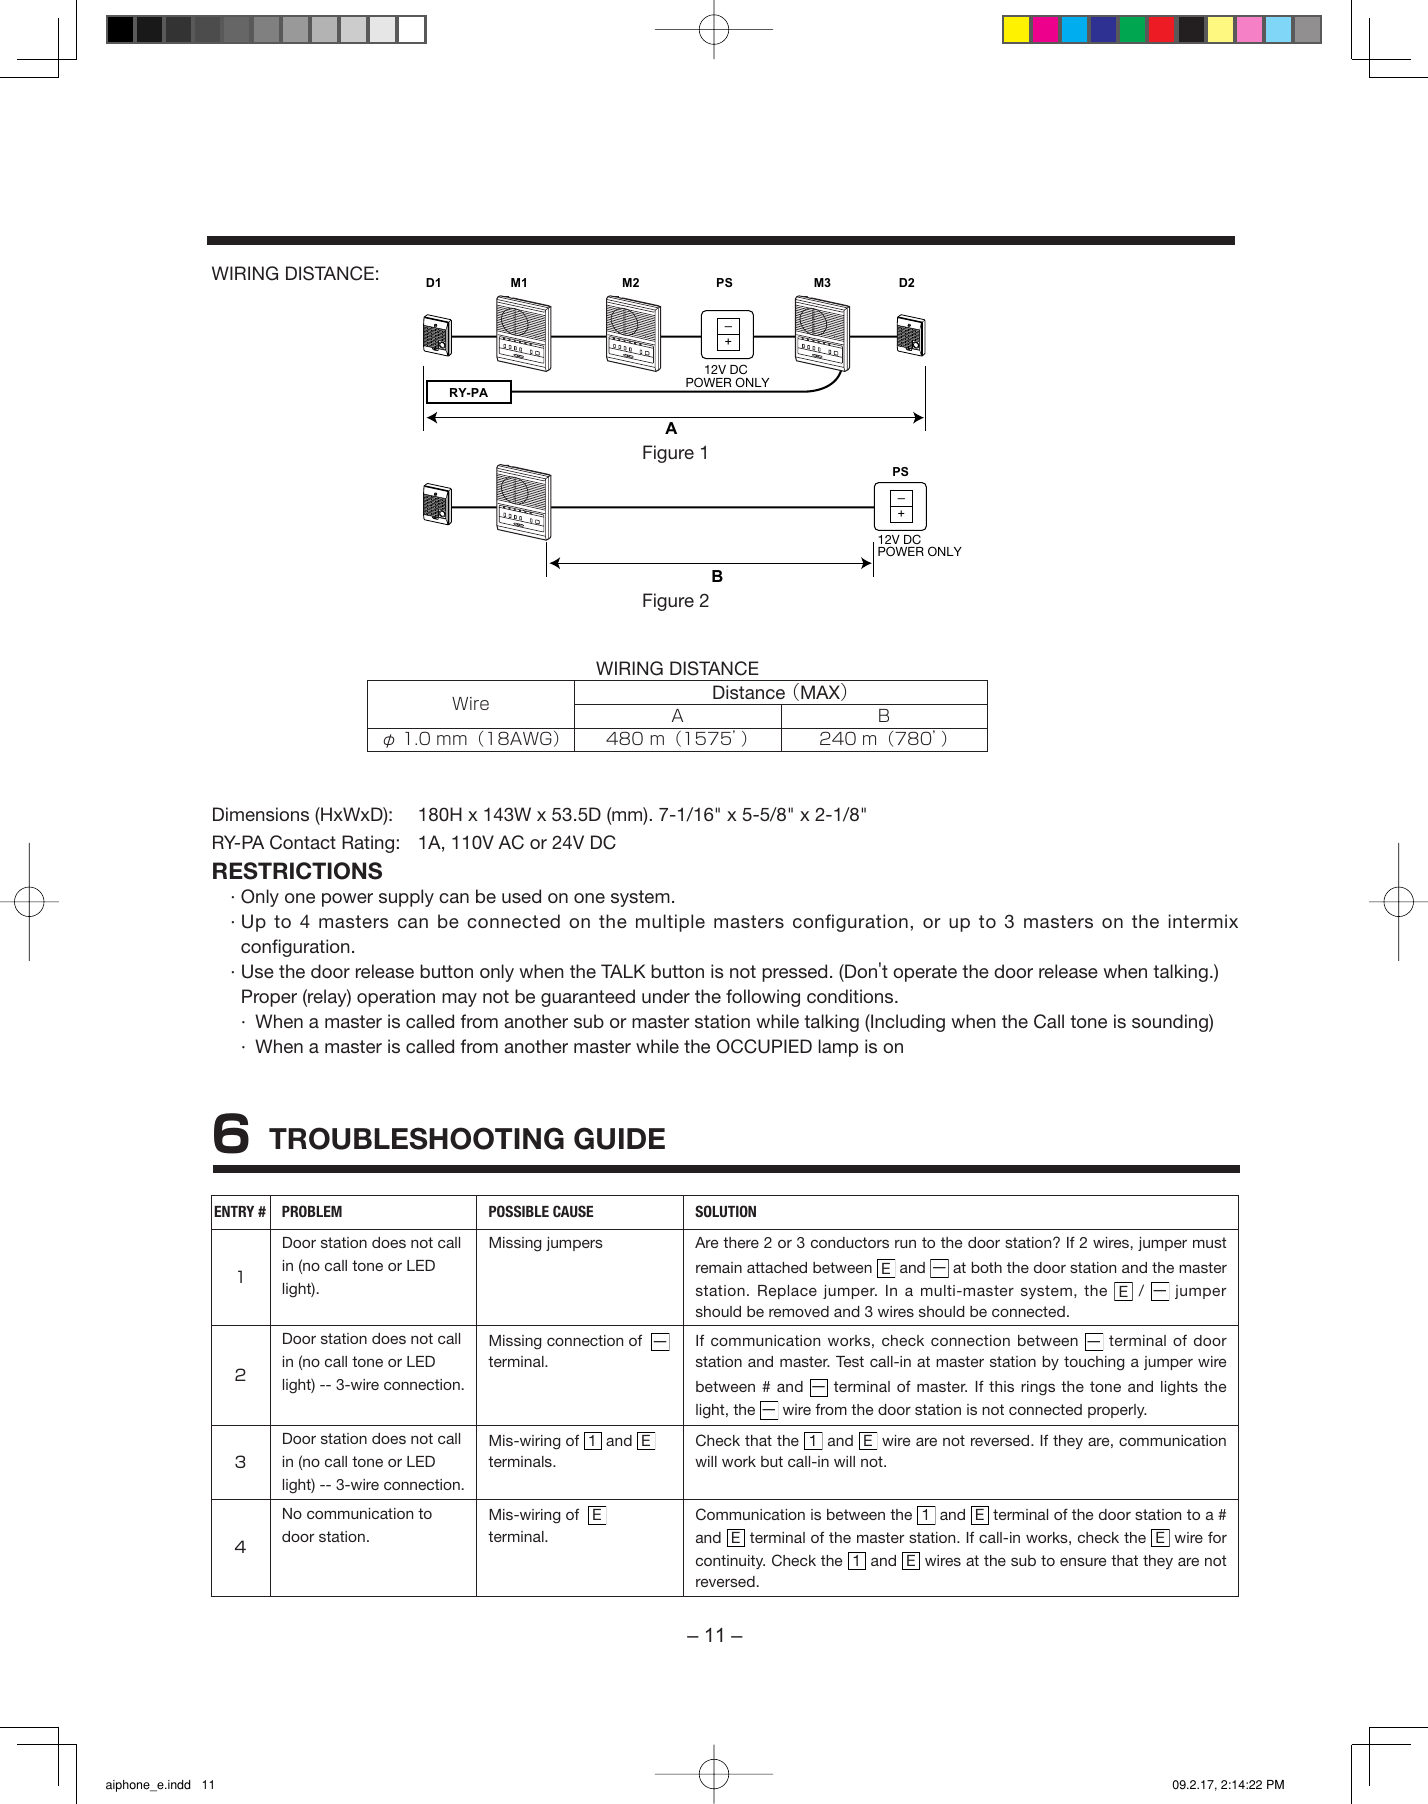 Page 11 of 12 - Aiphone Aiphone-Lef-3L-Users-Manual- Aiphone_e  Aiphone-lef-3l-users-manual